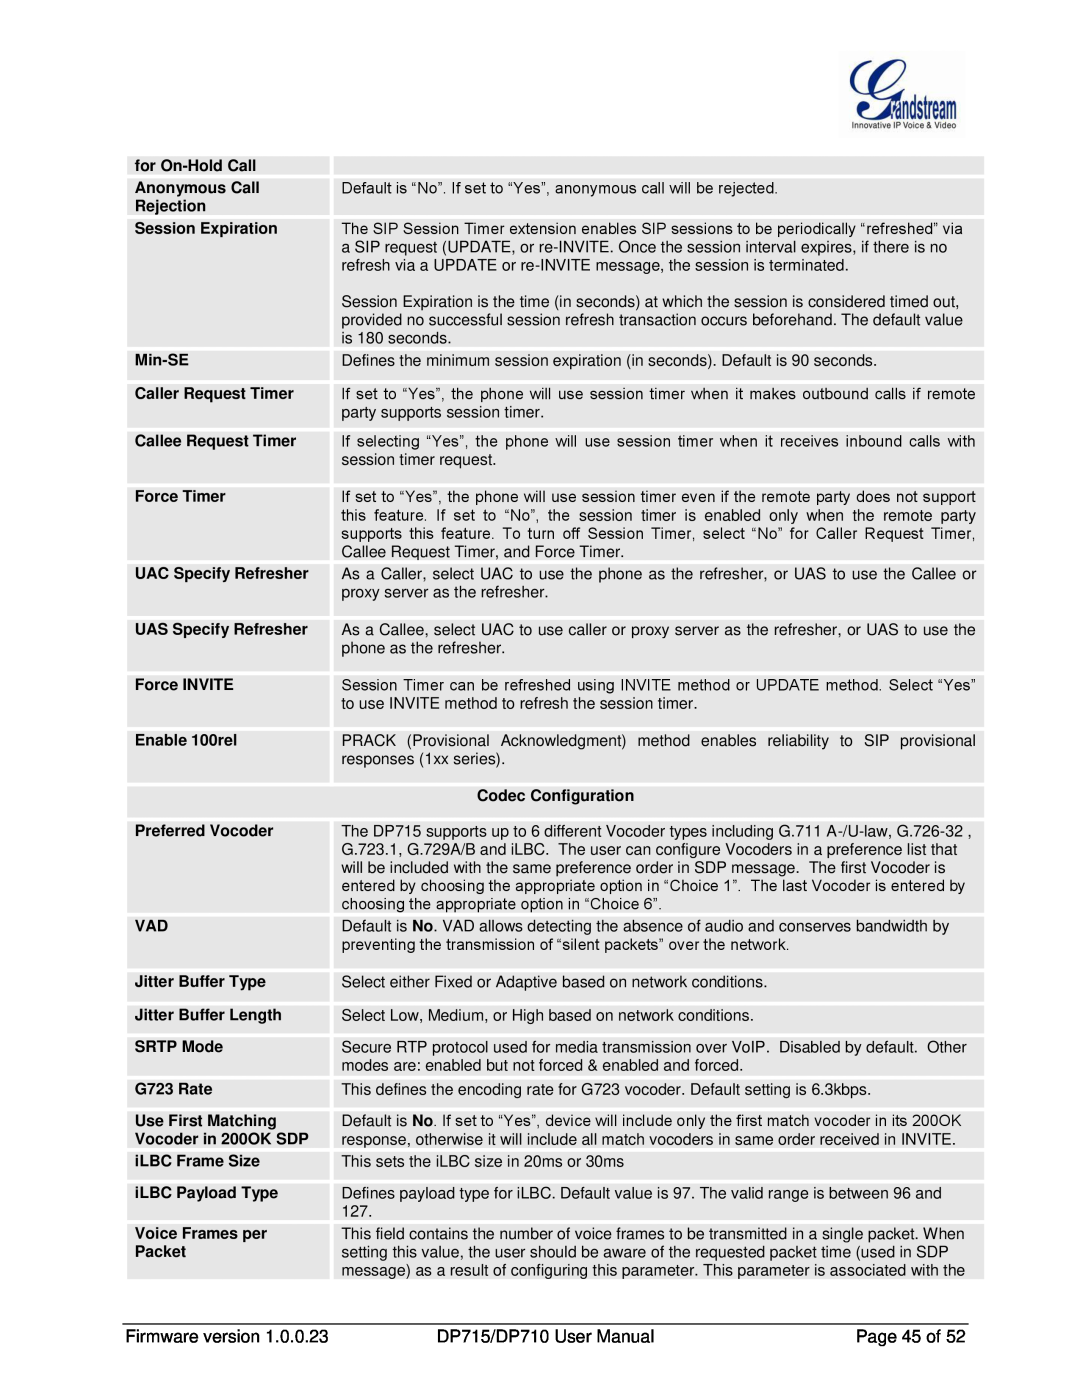 Grandstream Networks DP710 manual for On-Hold Call 